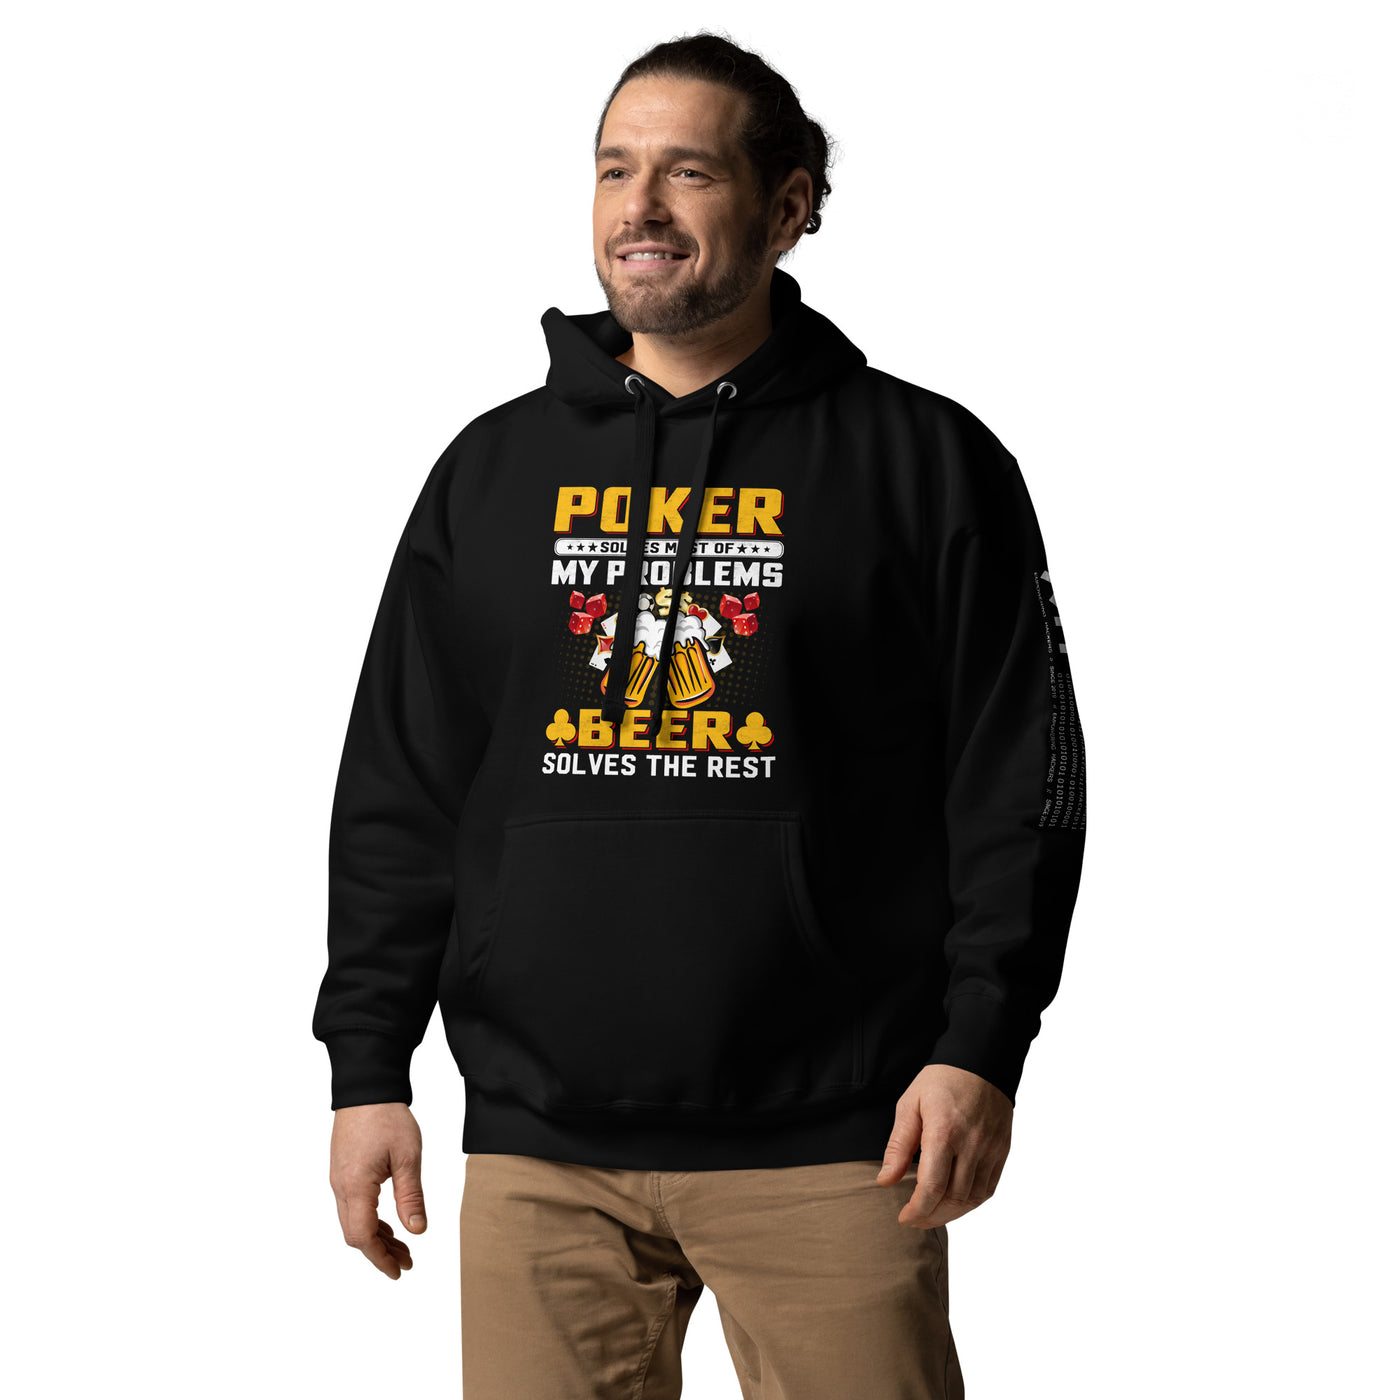 Poker Solves Most of My Problems, but Beer Solves the Rest - Unisex Hoodie